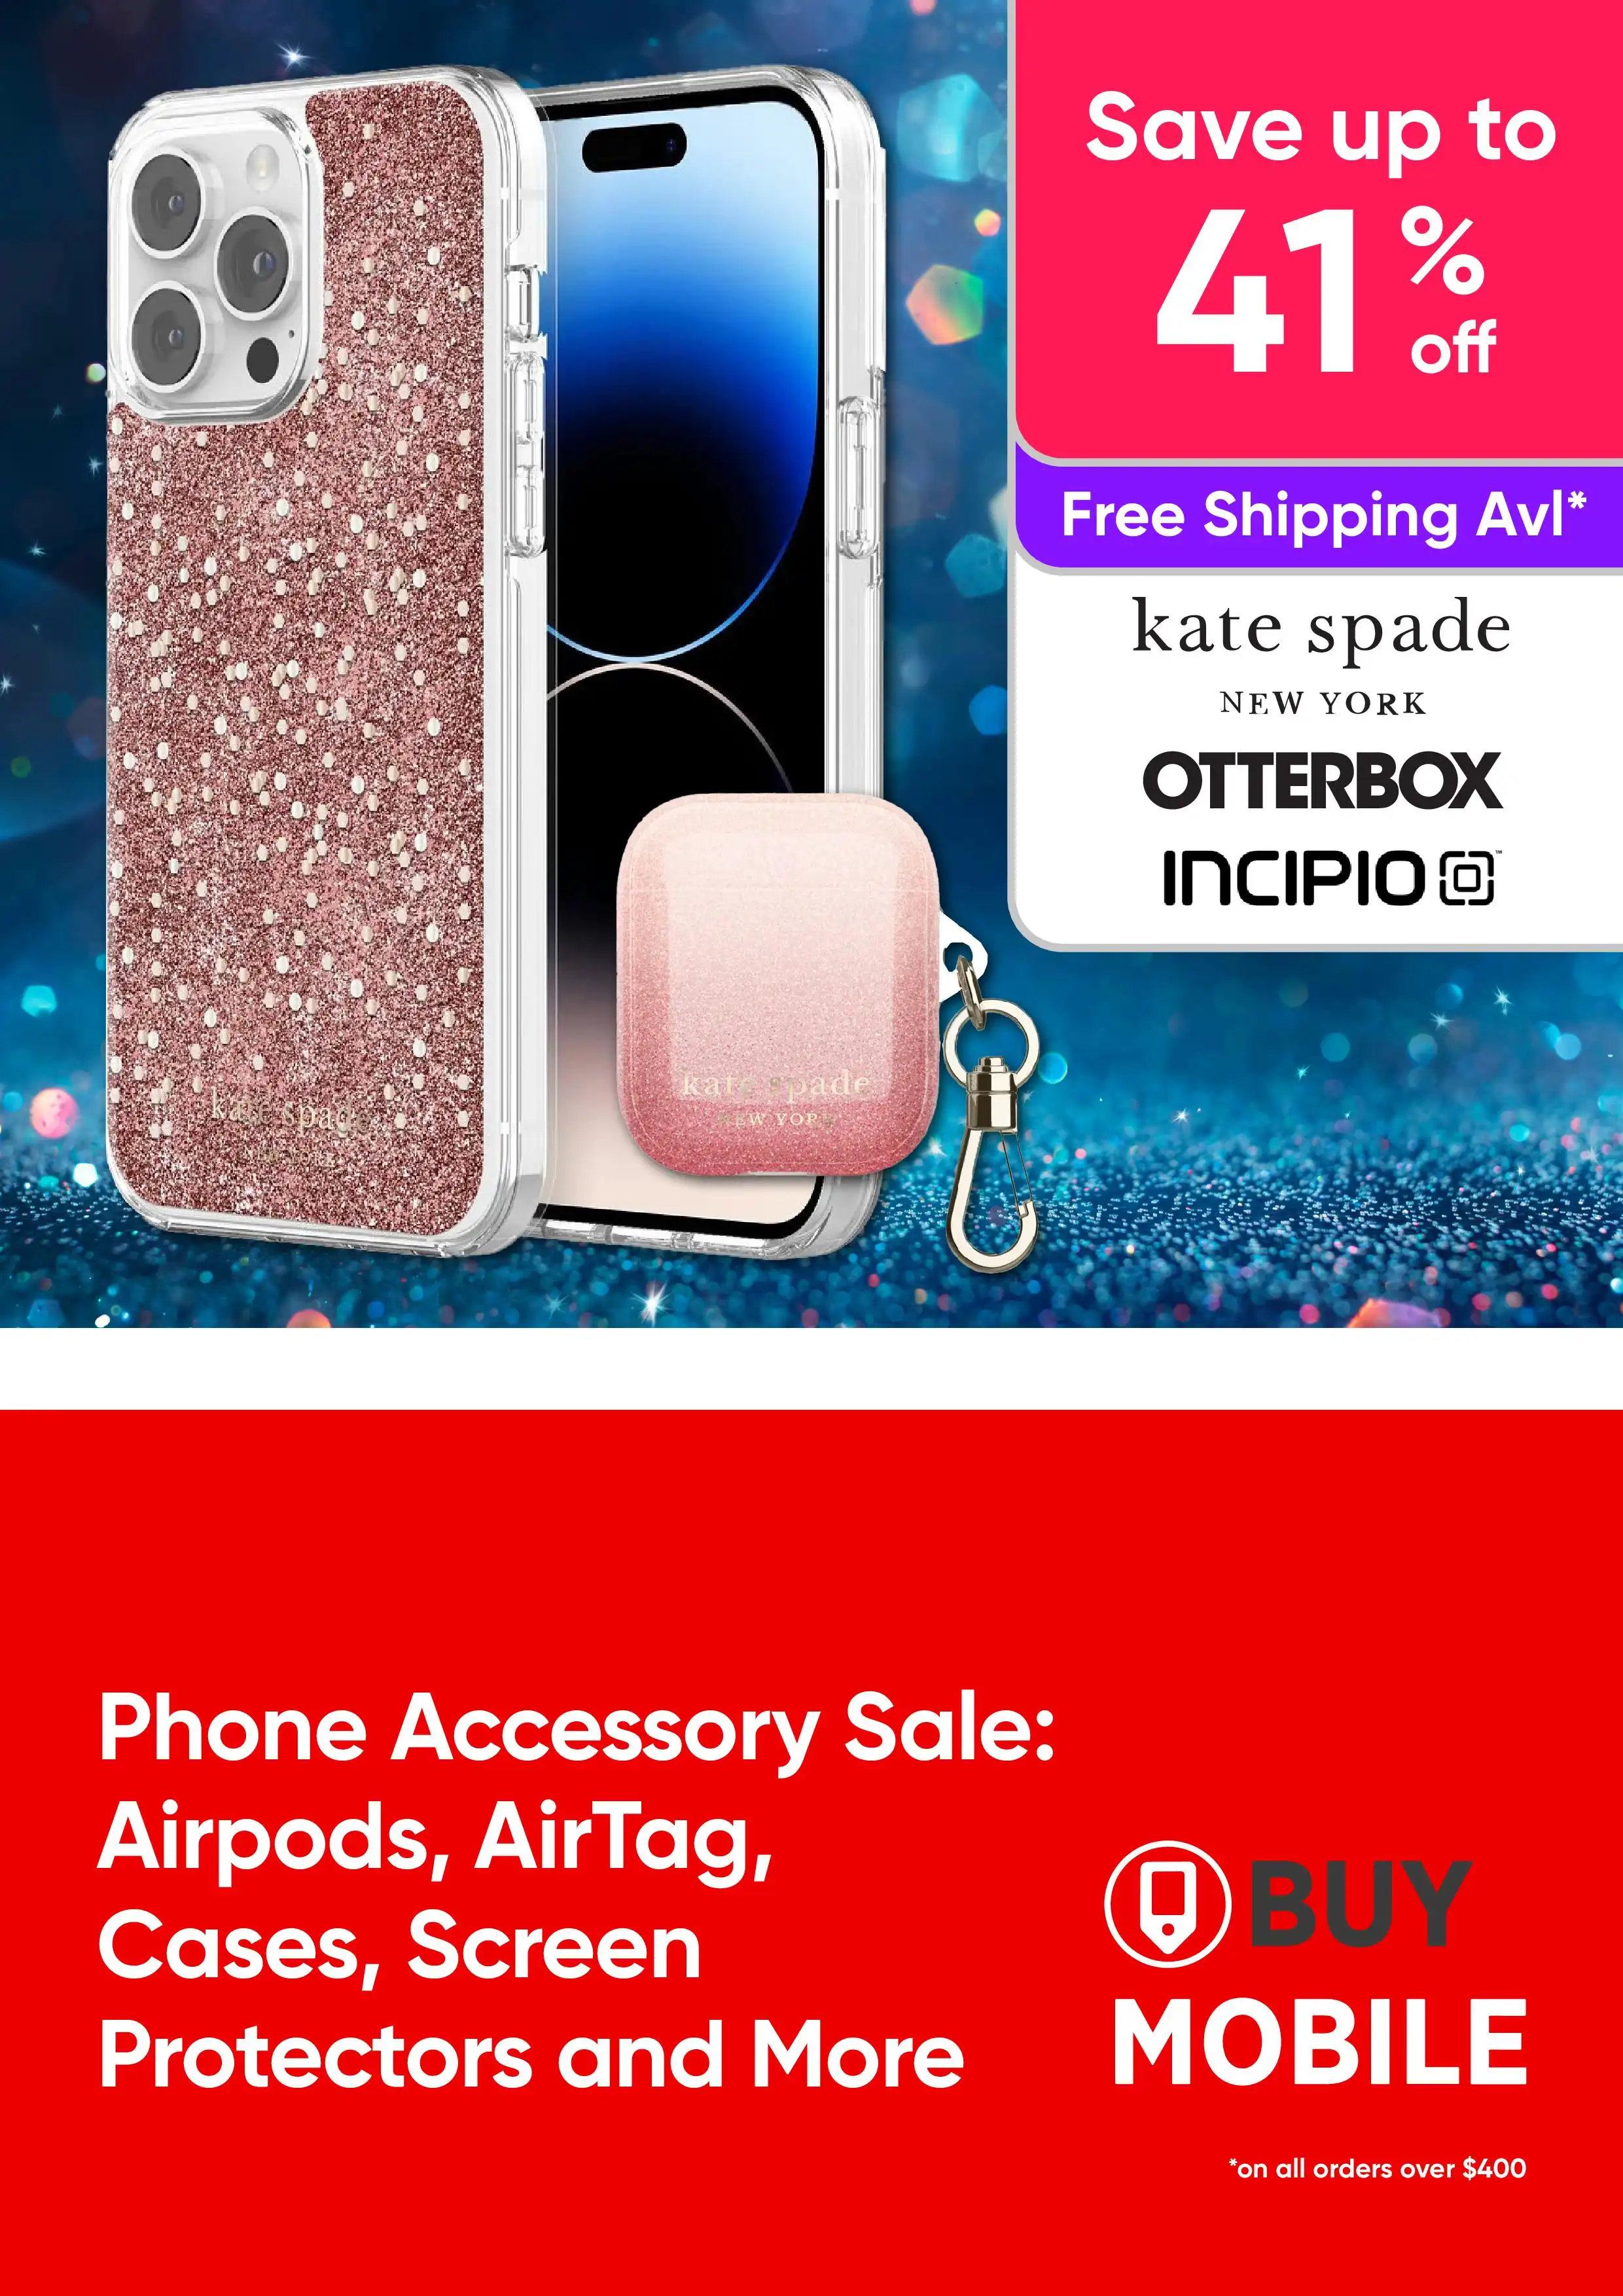 Phone Accessory Sale: Airpods, Airtag, Cases, Screen Protectors and More – up to 41% off